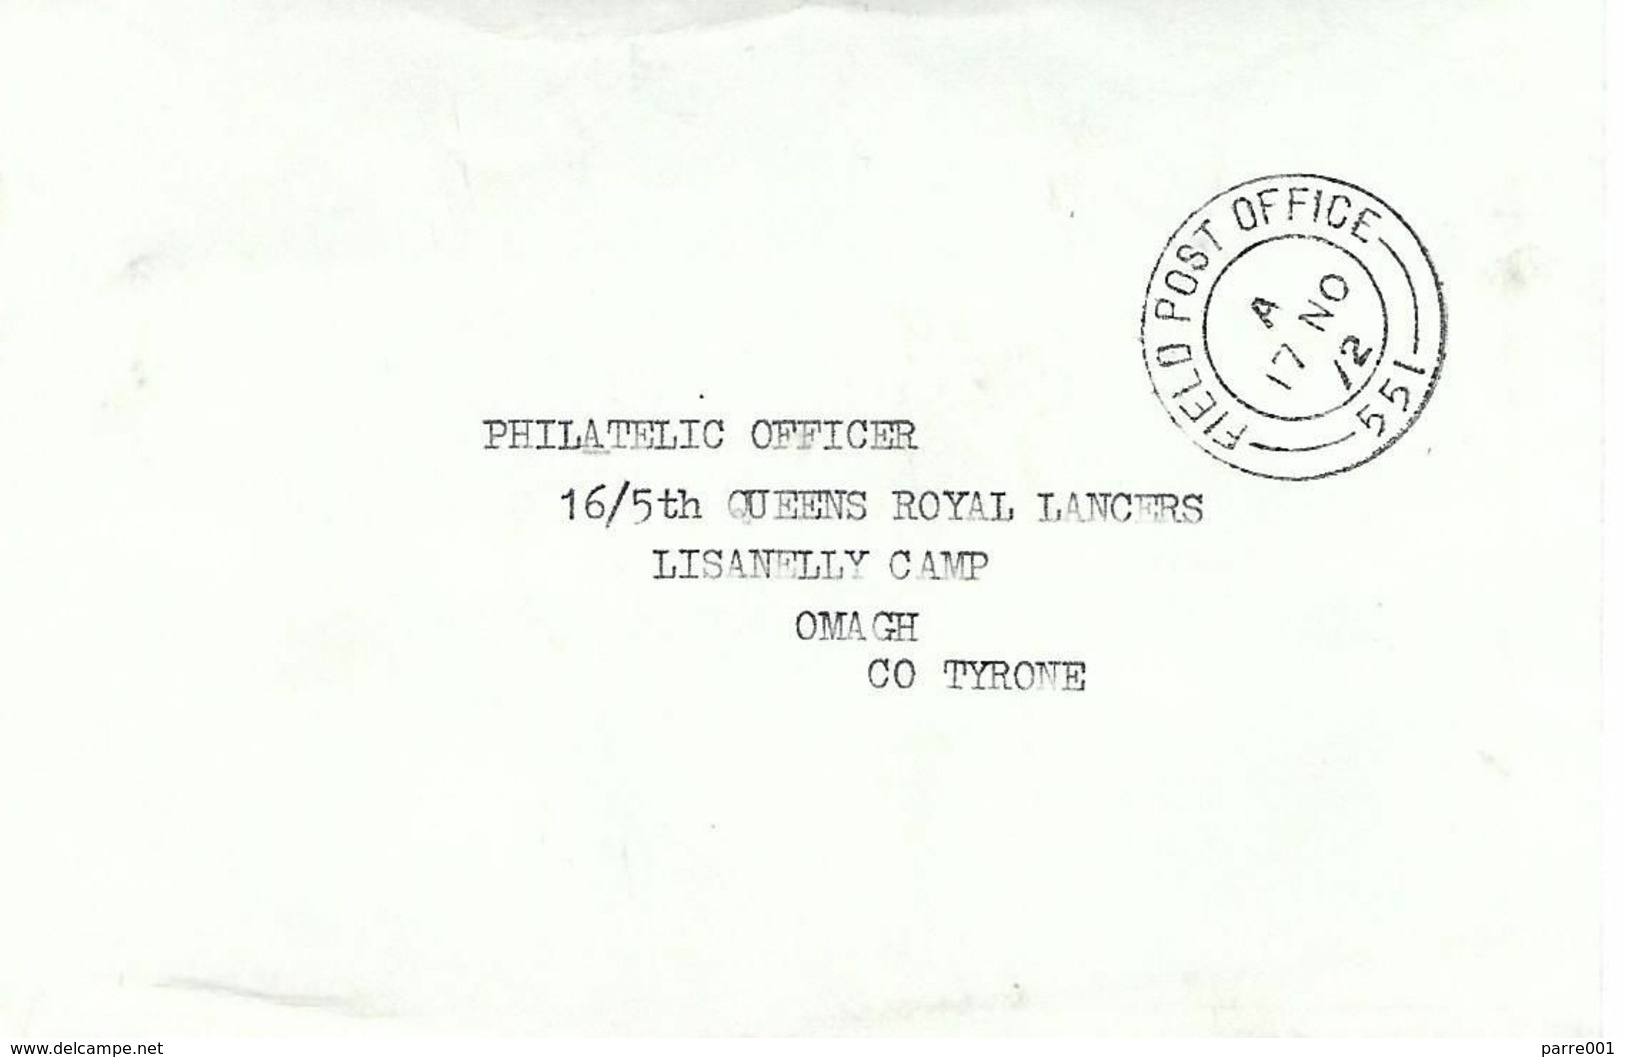 Northern Ireland UK 1972 FPO 551 Londonderry IRA Campaign 16/5th Queens Royal Lancers Lisanelly Camp Forces Cover - Militaria